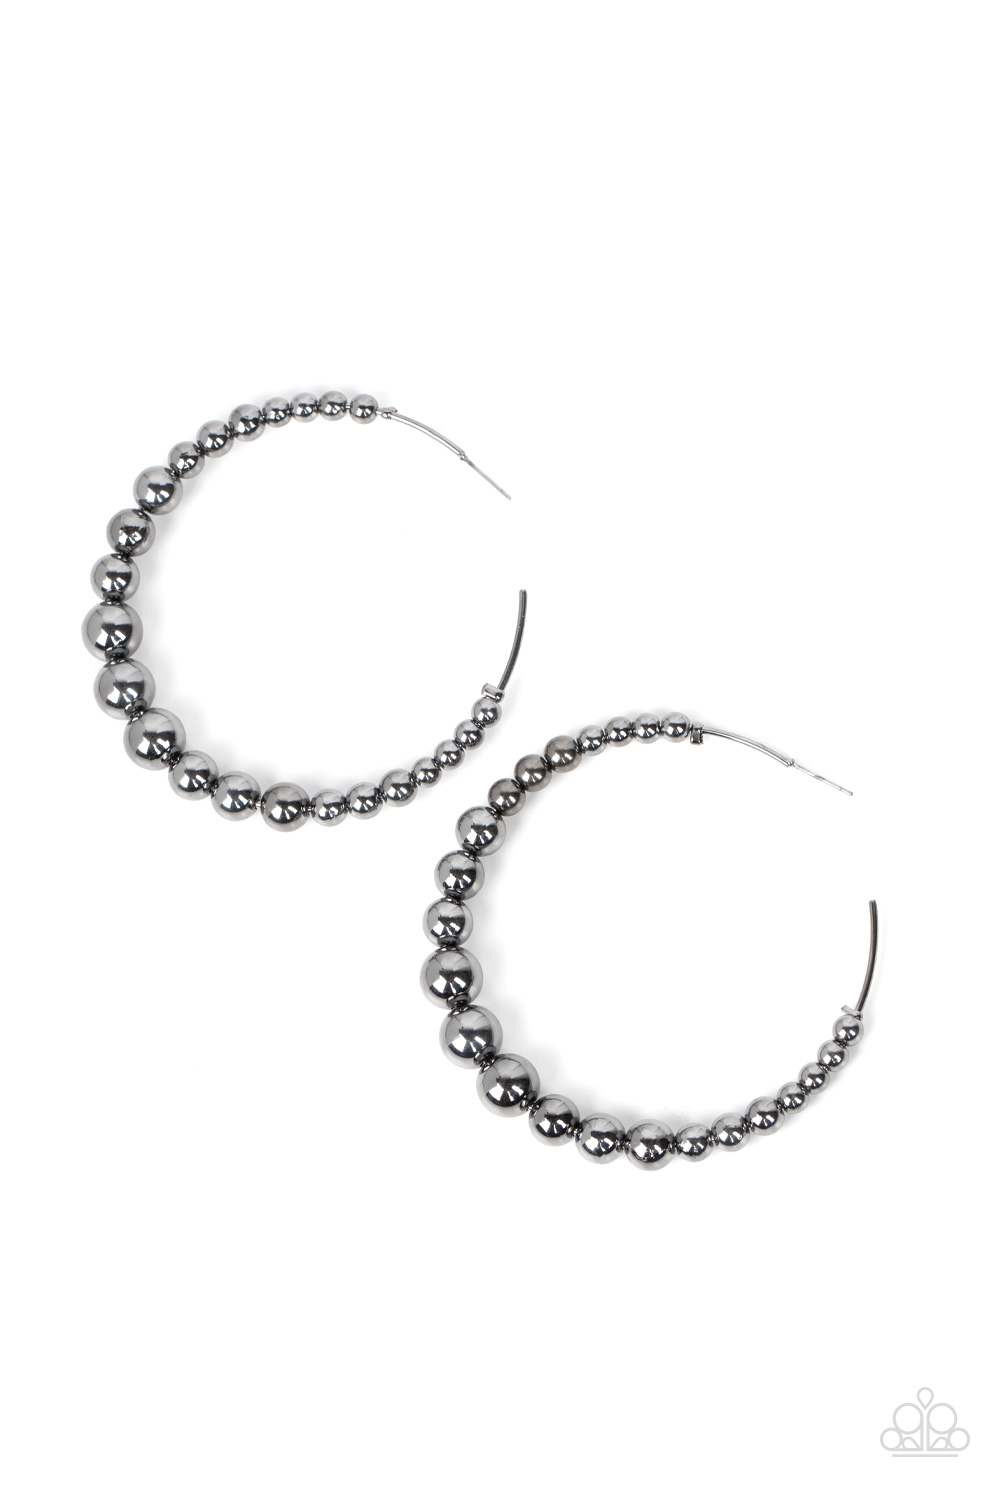 Earring - Show Off Your Curves - Black